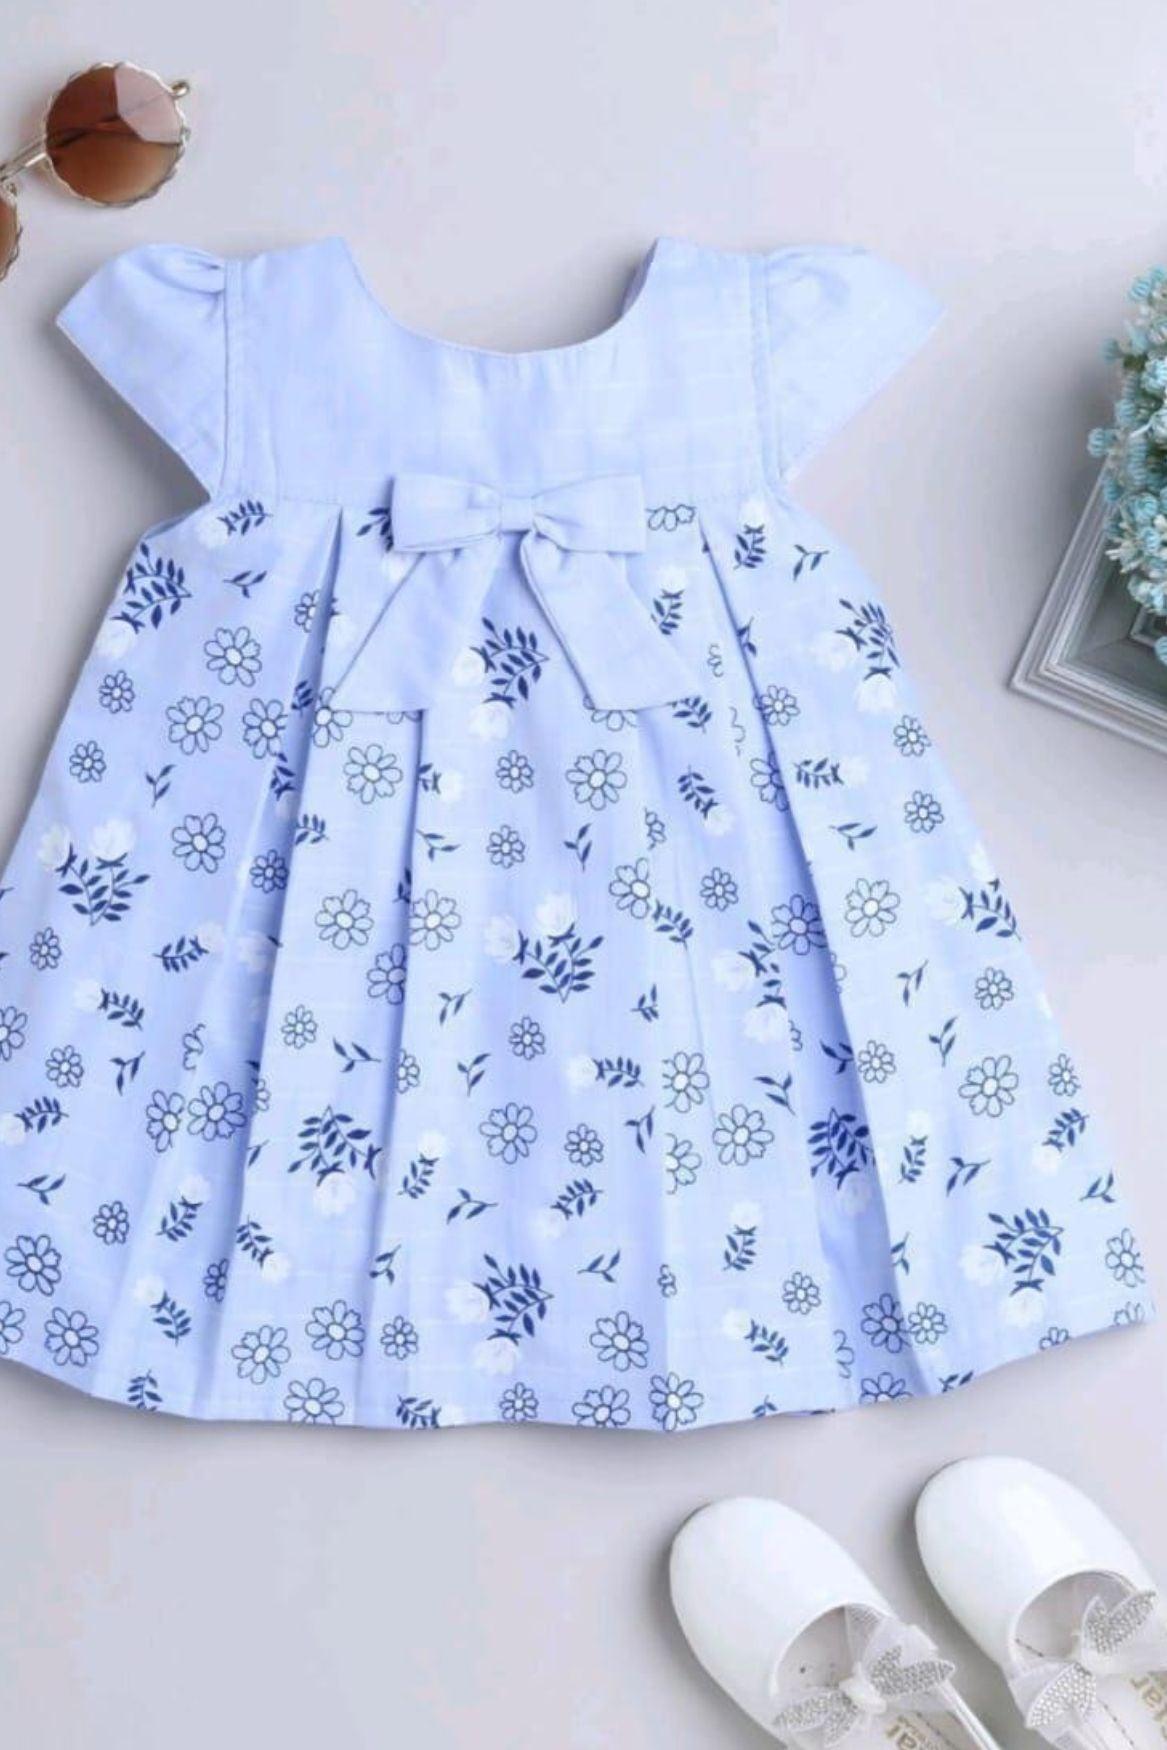 Sky Blue Cotton Floral Printed Frock With Bow Embellishment For Girls - Lagorii Kids